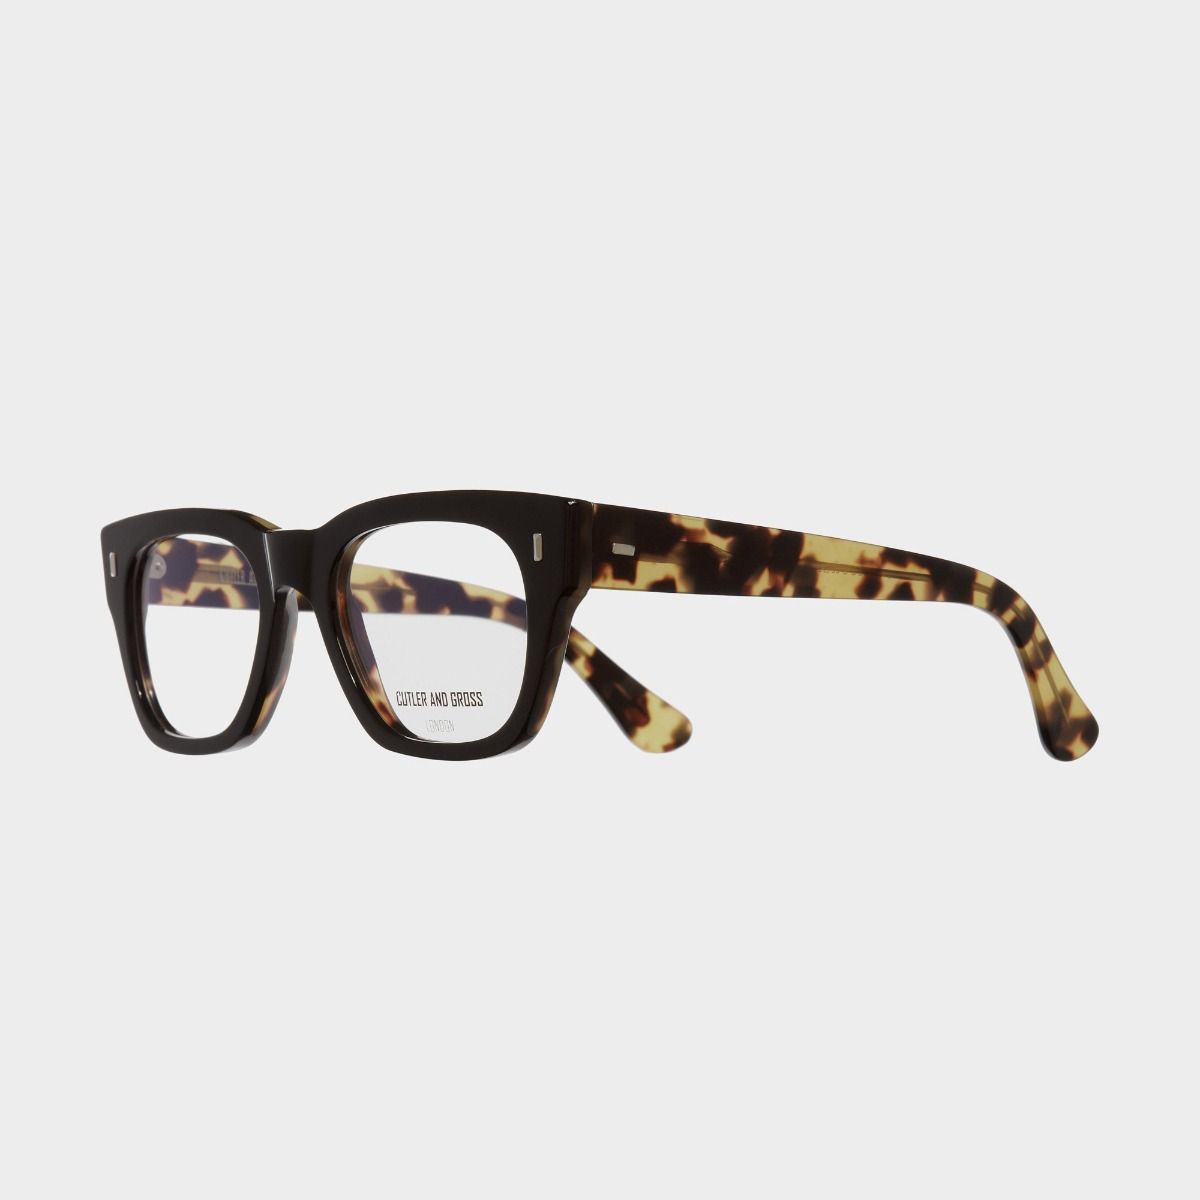 Cutler and Gross 0772V2 Optical Square Glasses - Black on Camo